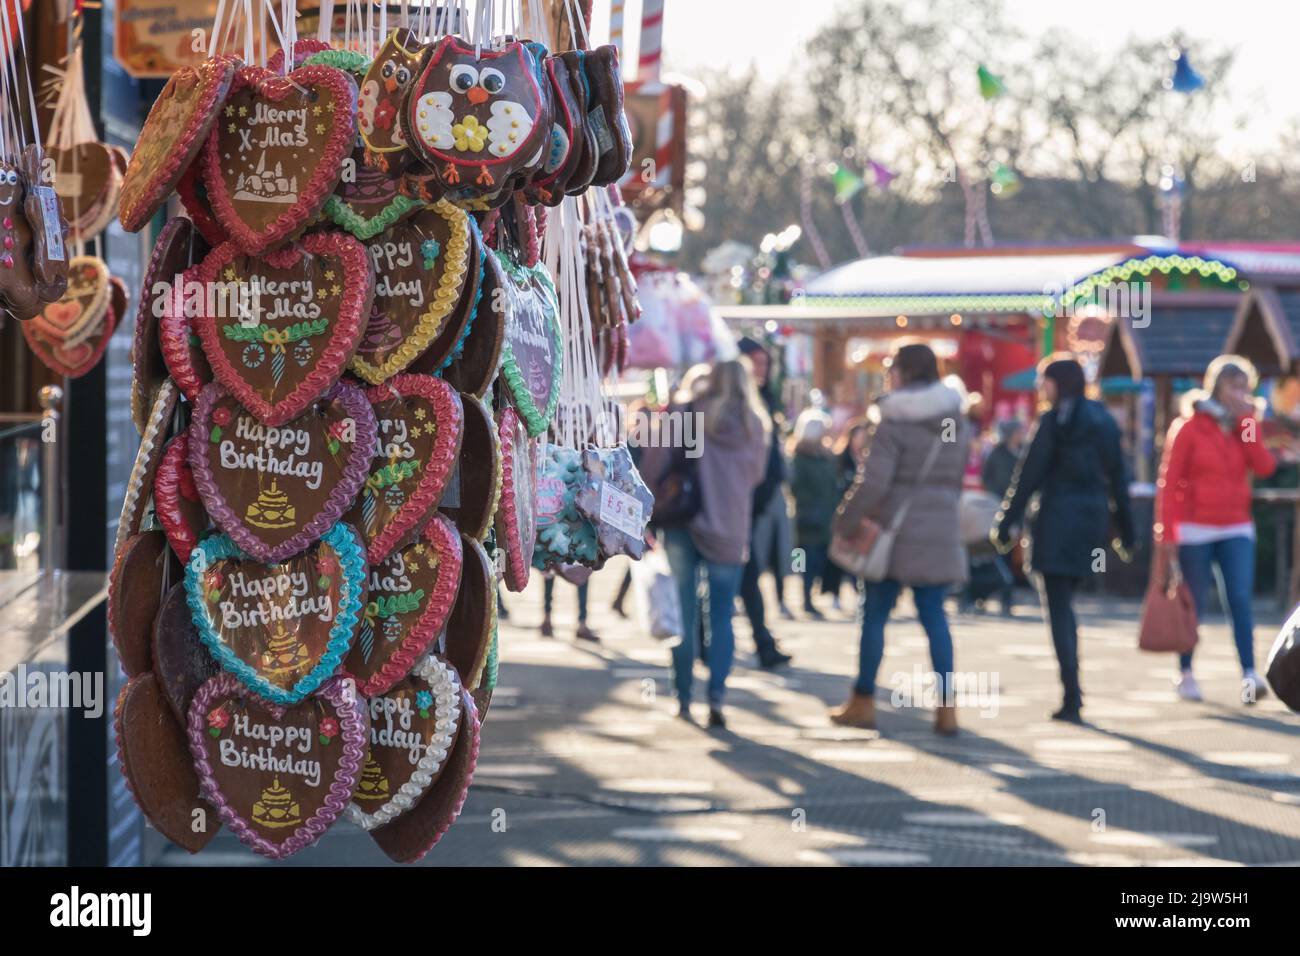 Gingerbread hearts on display at a confectionery stall of Christmas market in Hyde Park Winter Wonderland in London Stock Photo